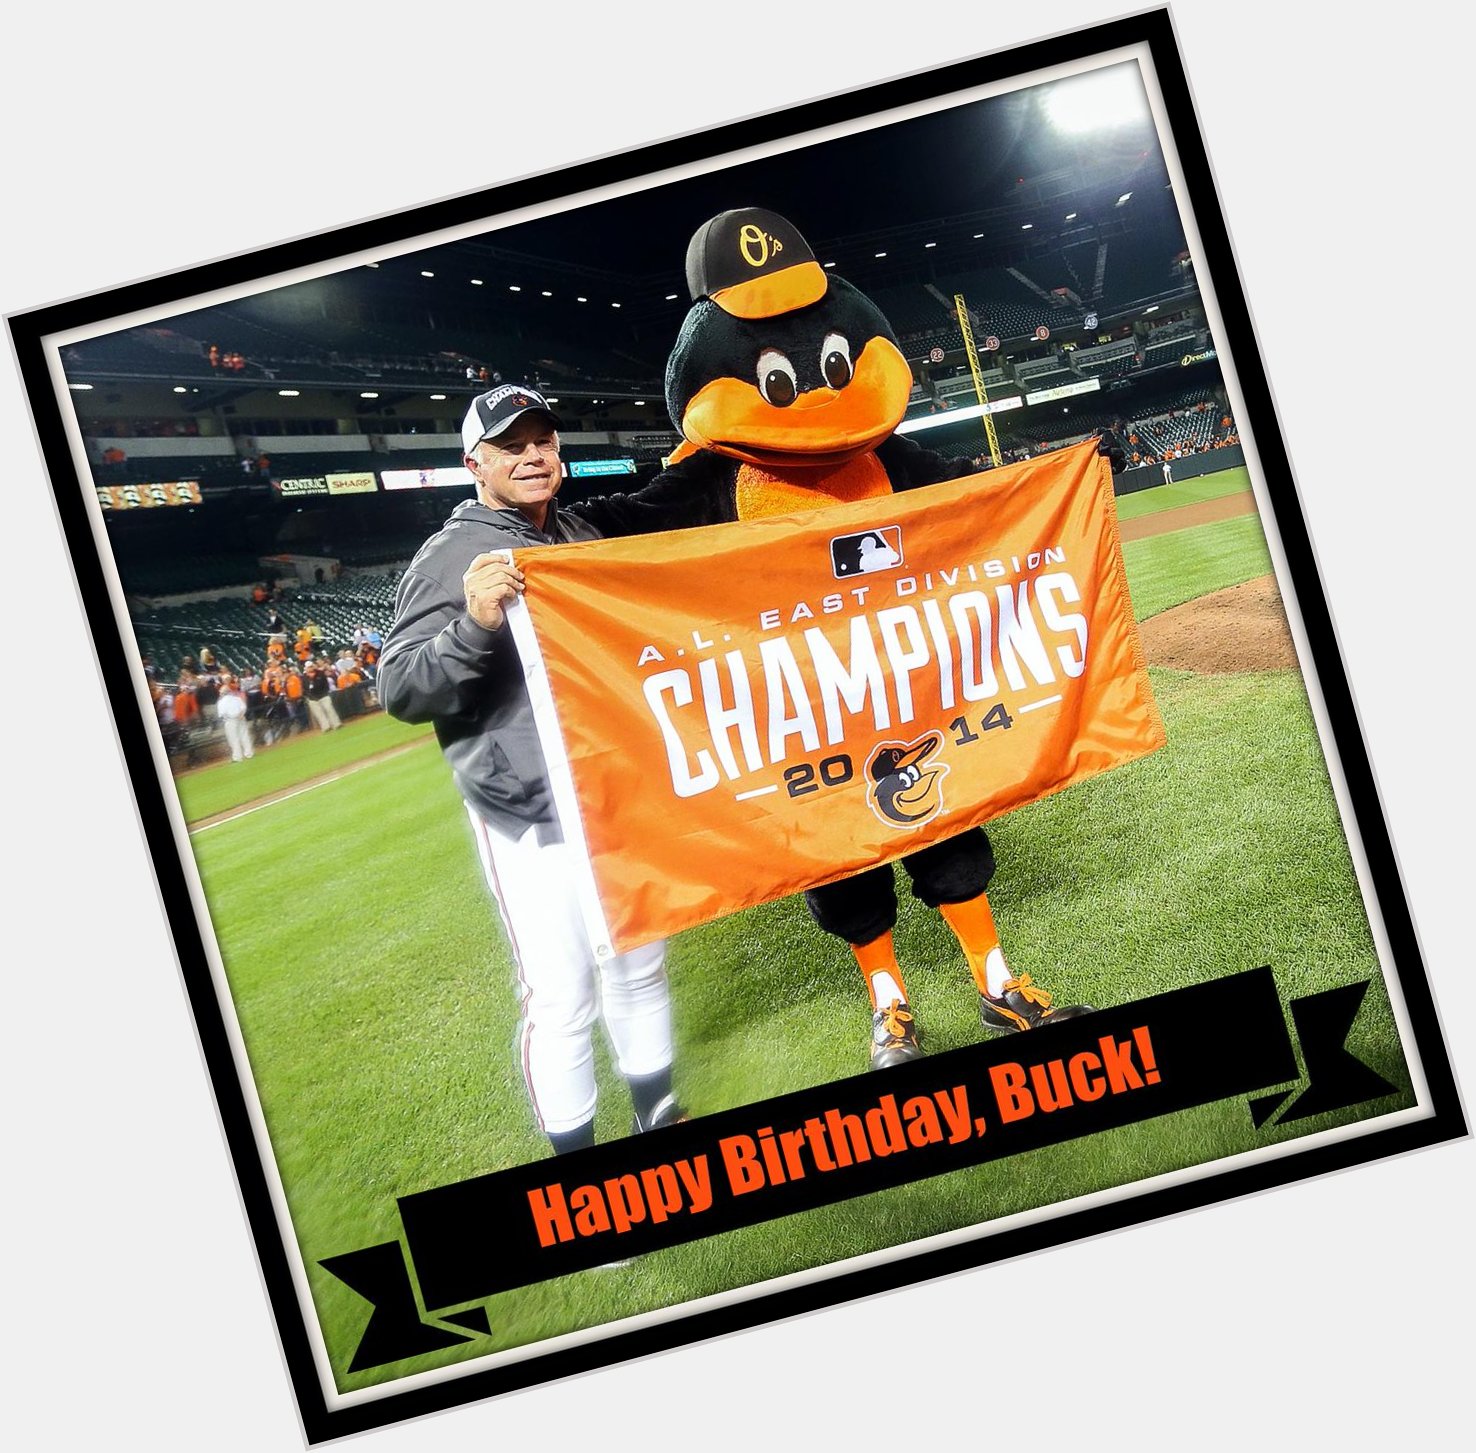 Happy Birthday to Buck Showalter! Remessage to wish him a great day. 